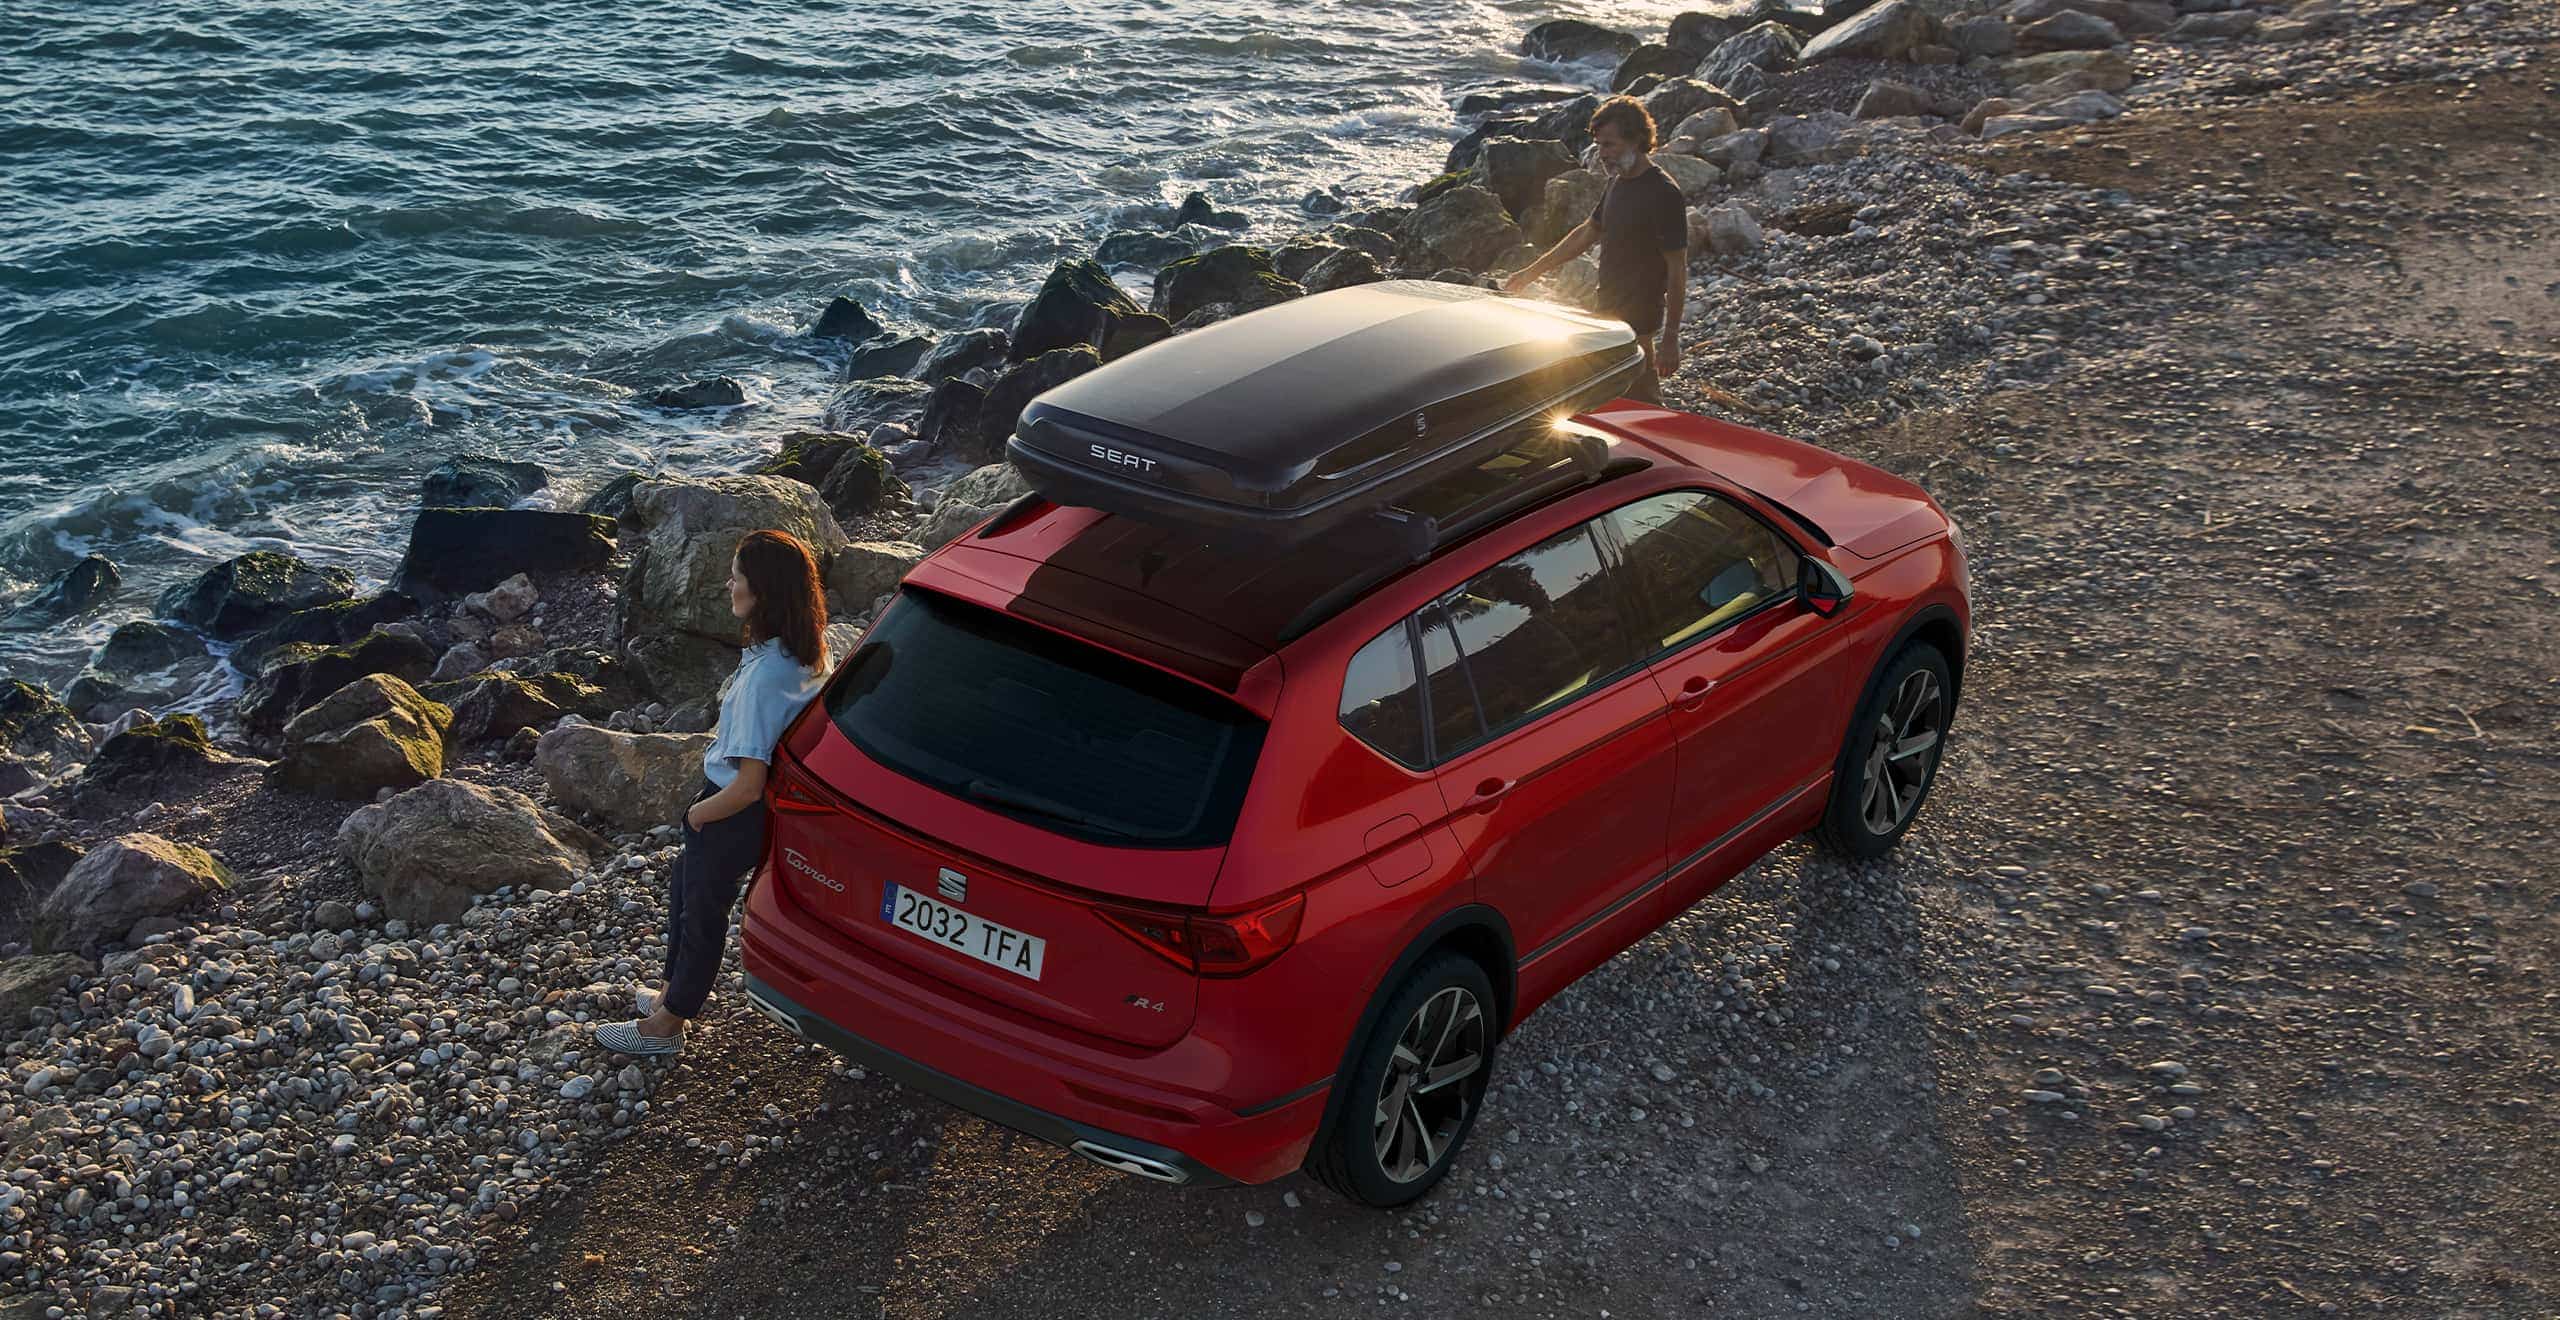 Woman lay on the new SEAT Tarraco SUV 7 seater merlot red colour with a roof box accessory